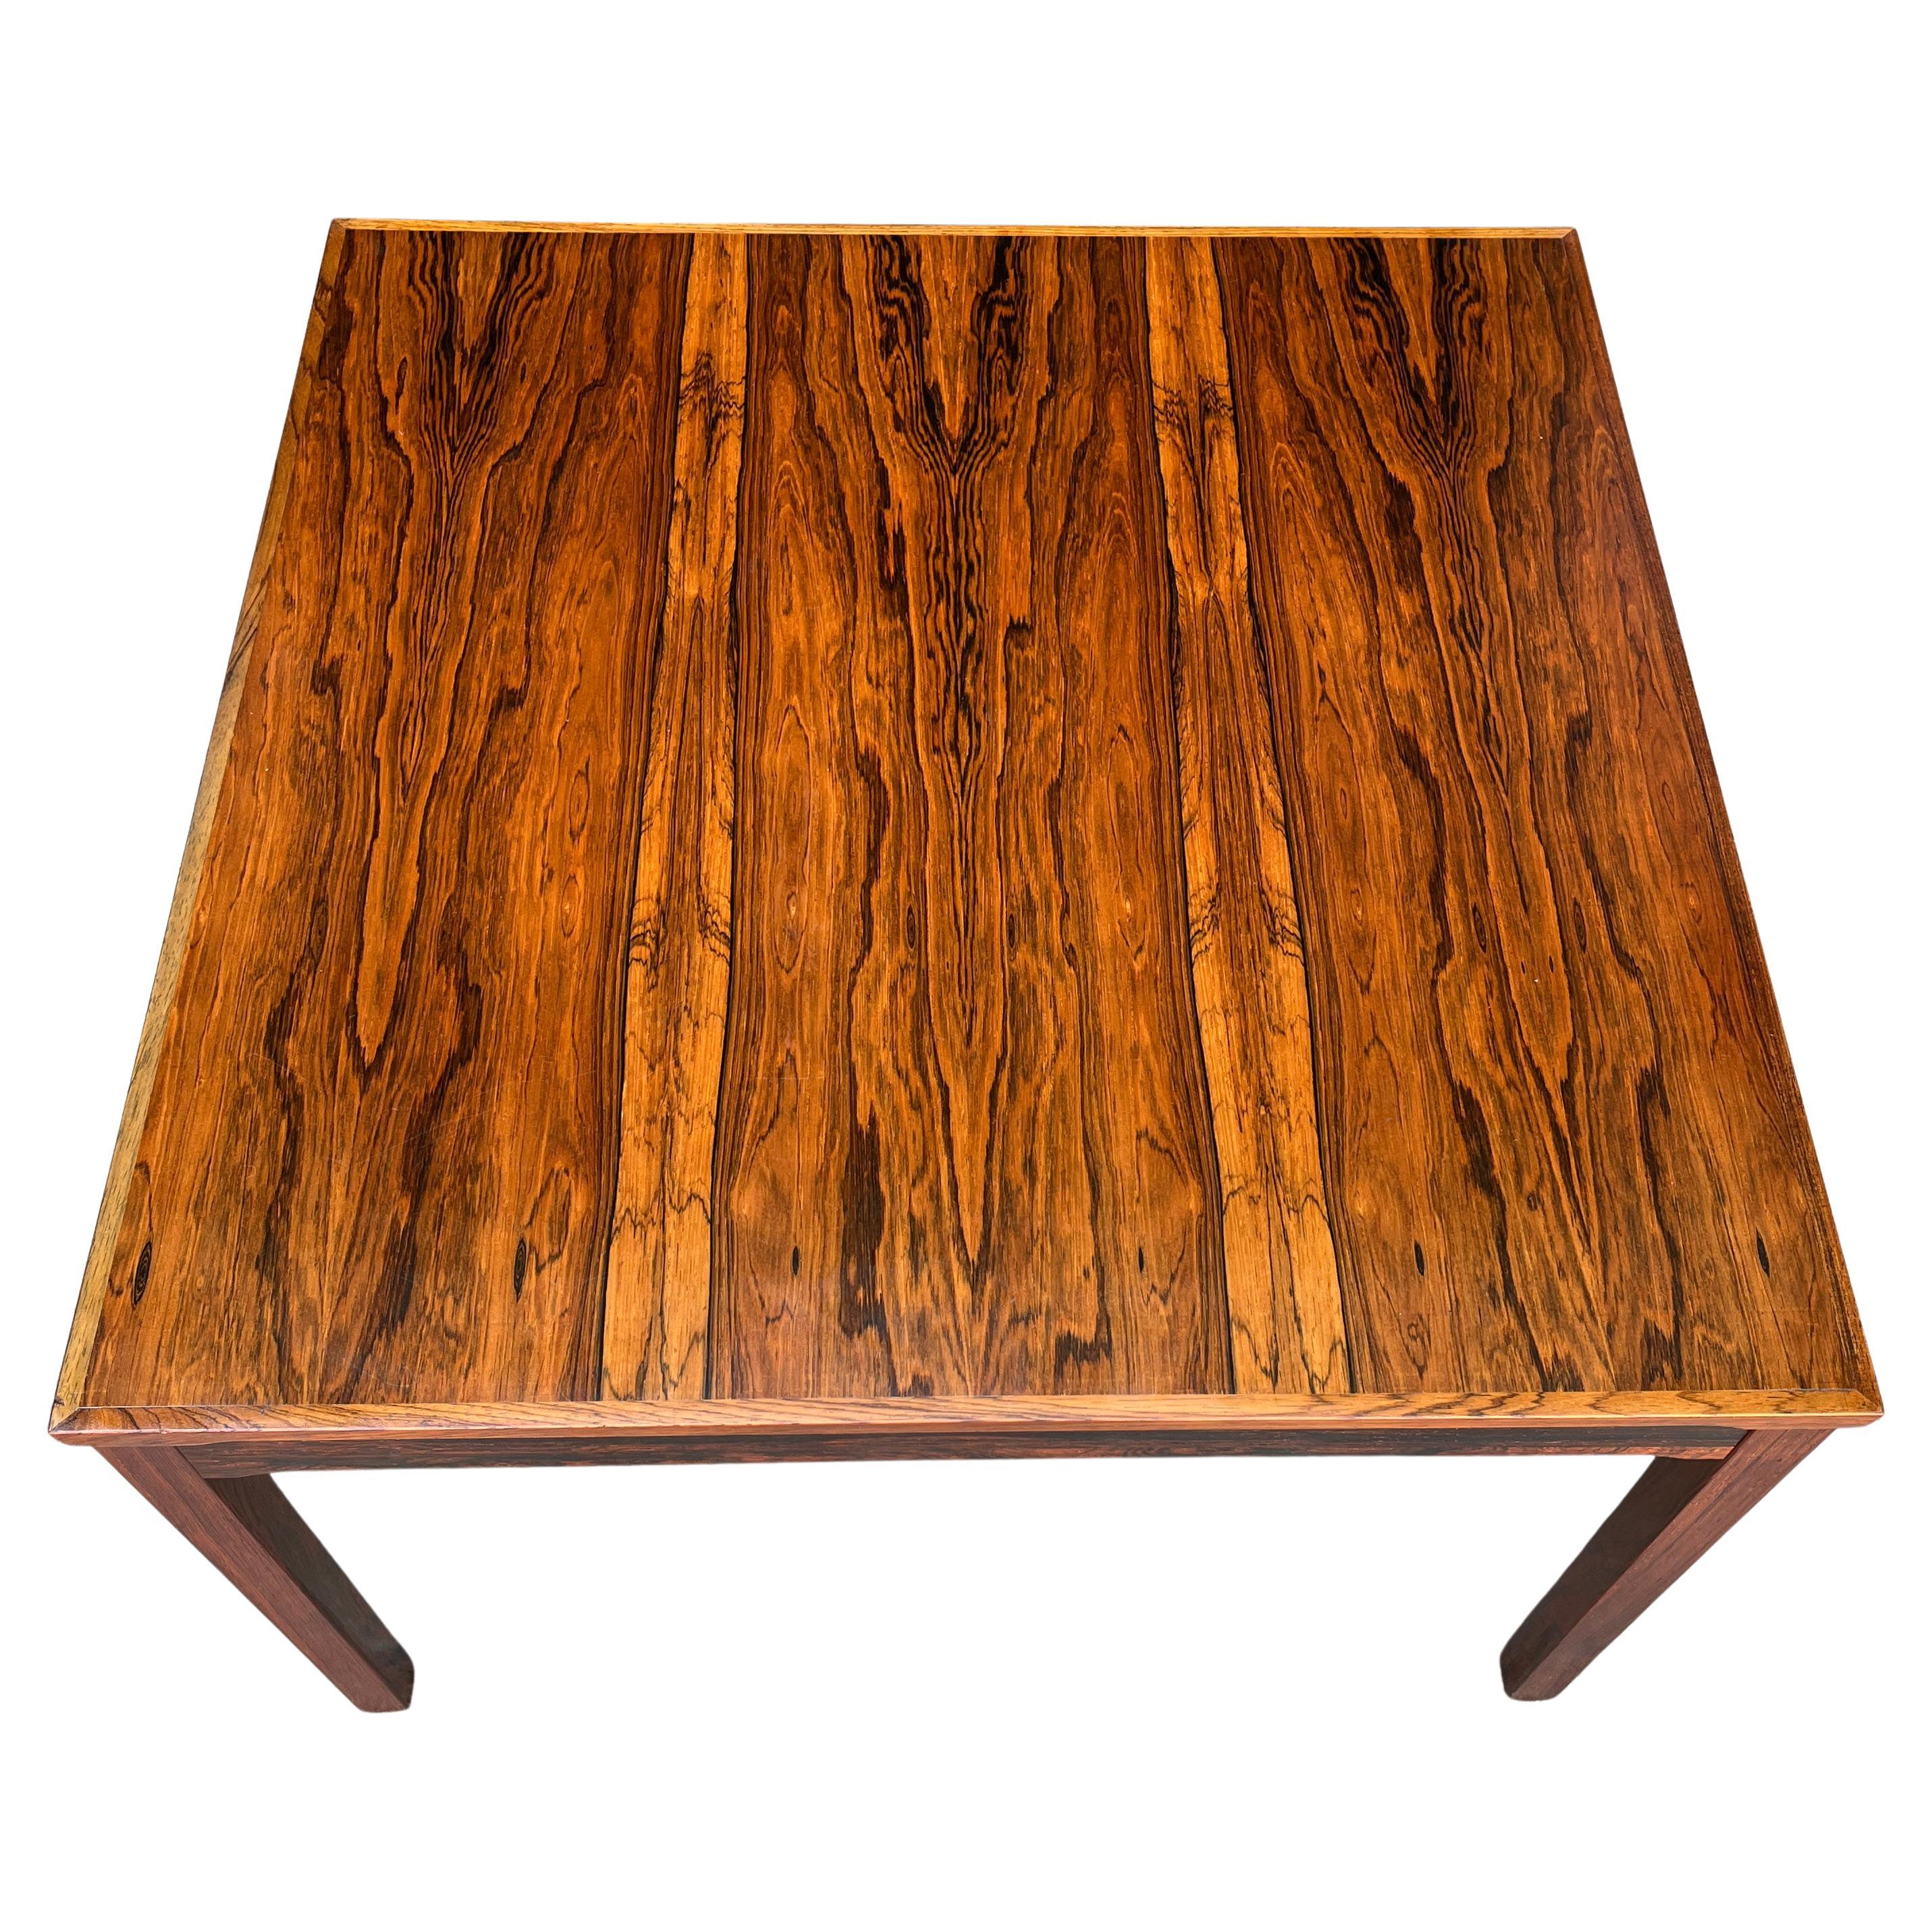 Haug Snekkeri Scandinavian Midcentury rosewood parsons style coffee table, side table, or end table. Solid rosewood legs, beautiful grain pattern on top surface.
Excellent original vintage condition with no condition issues. 

Model number nr 816.